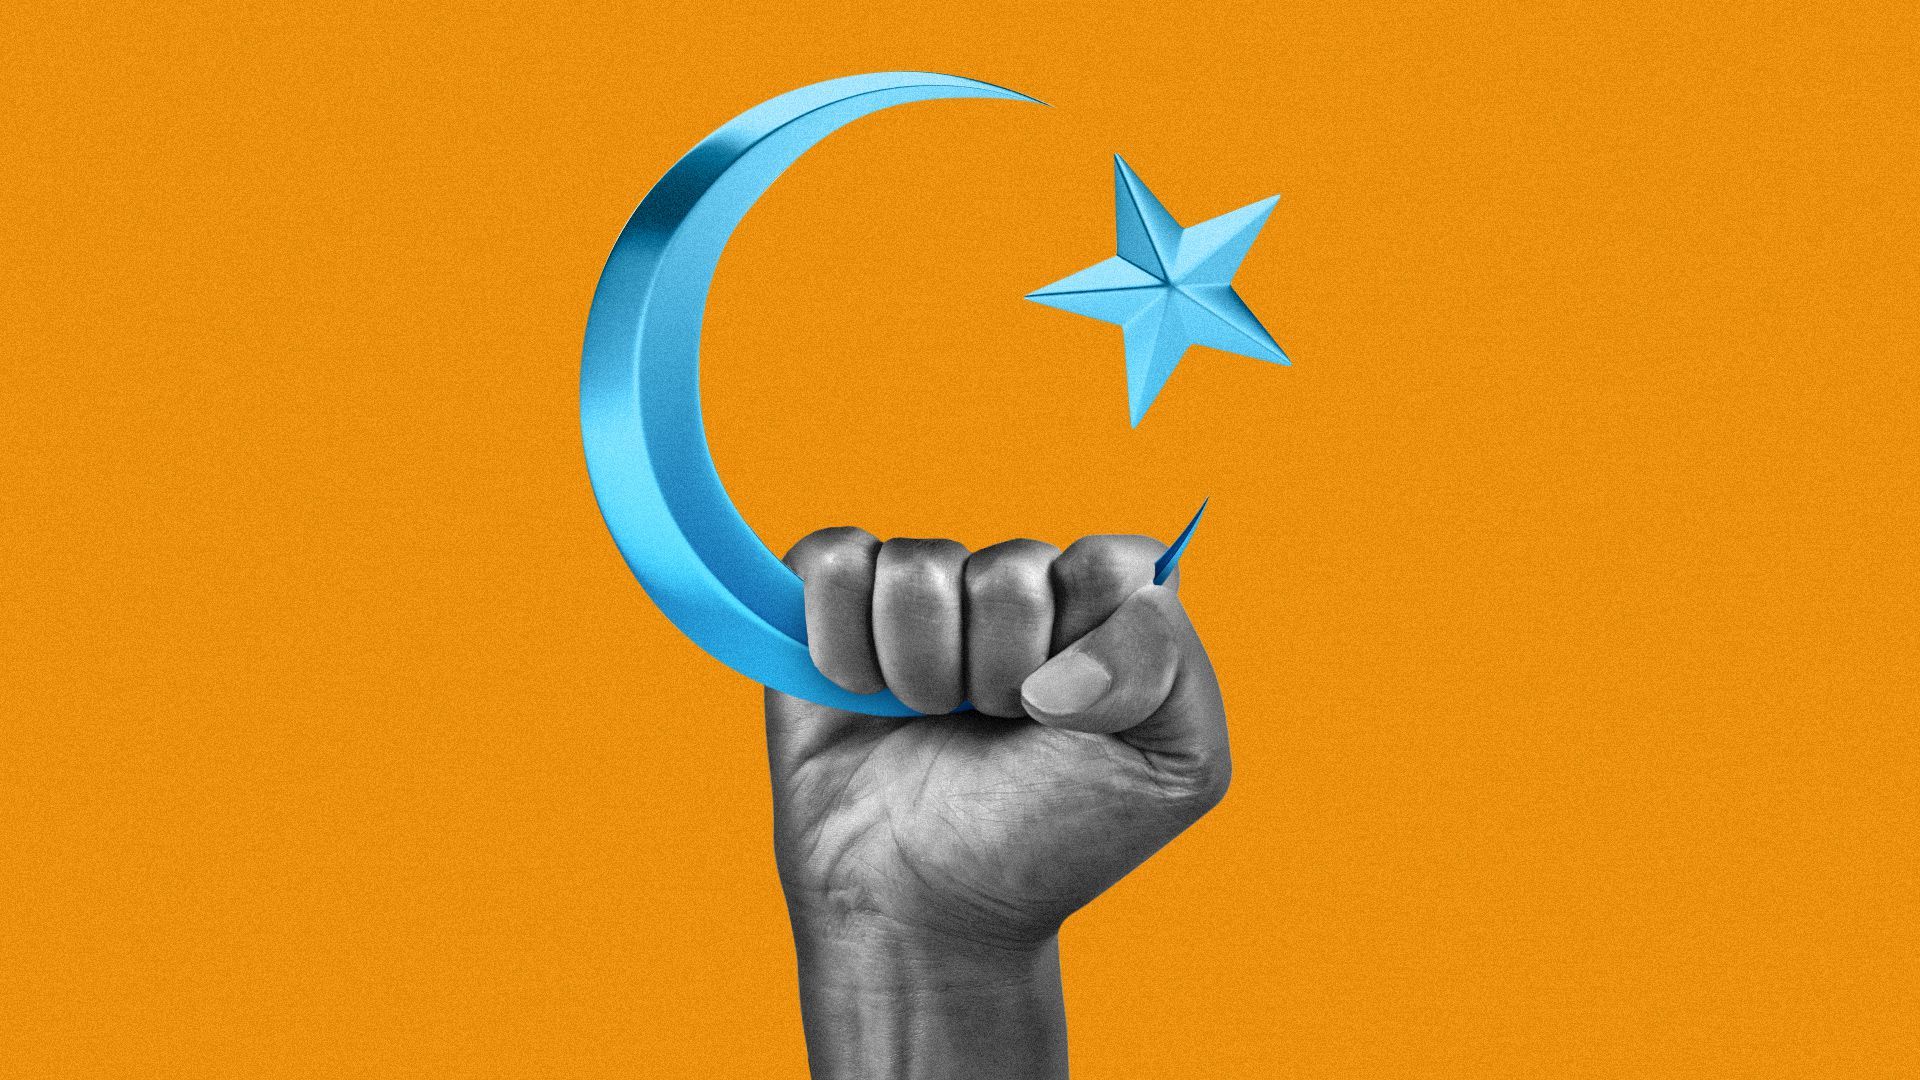 Illustration of a holding an Islamic crescent stylized in the Uyghur flag colors. 